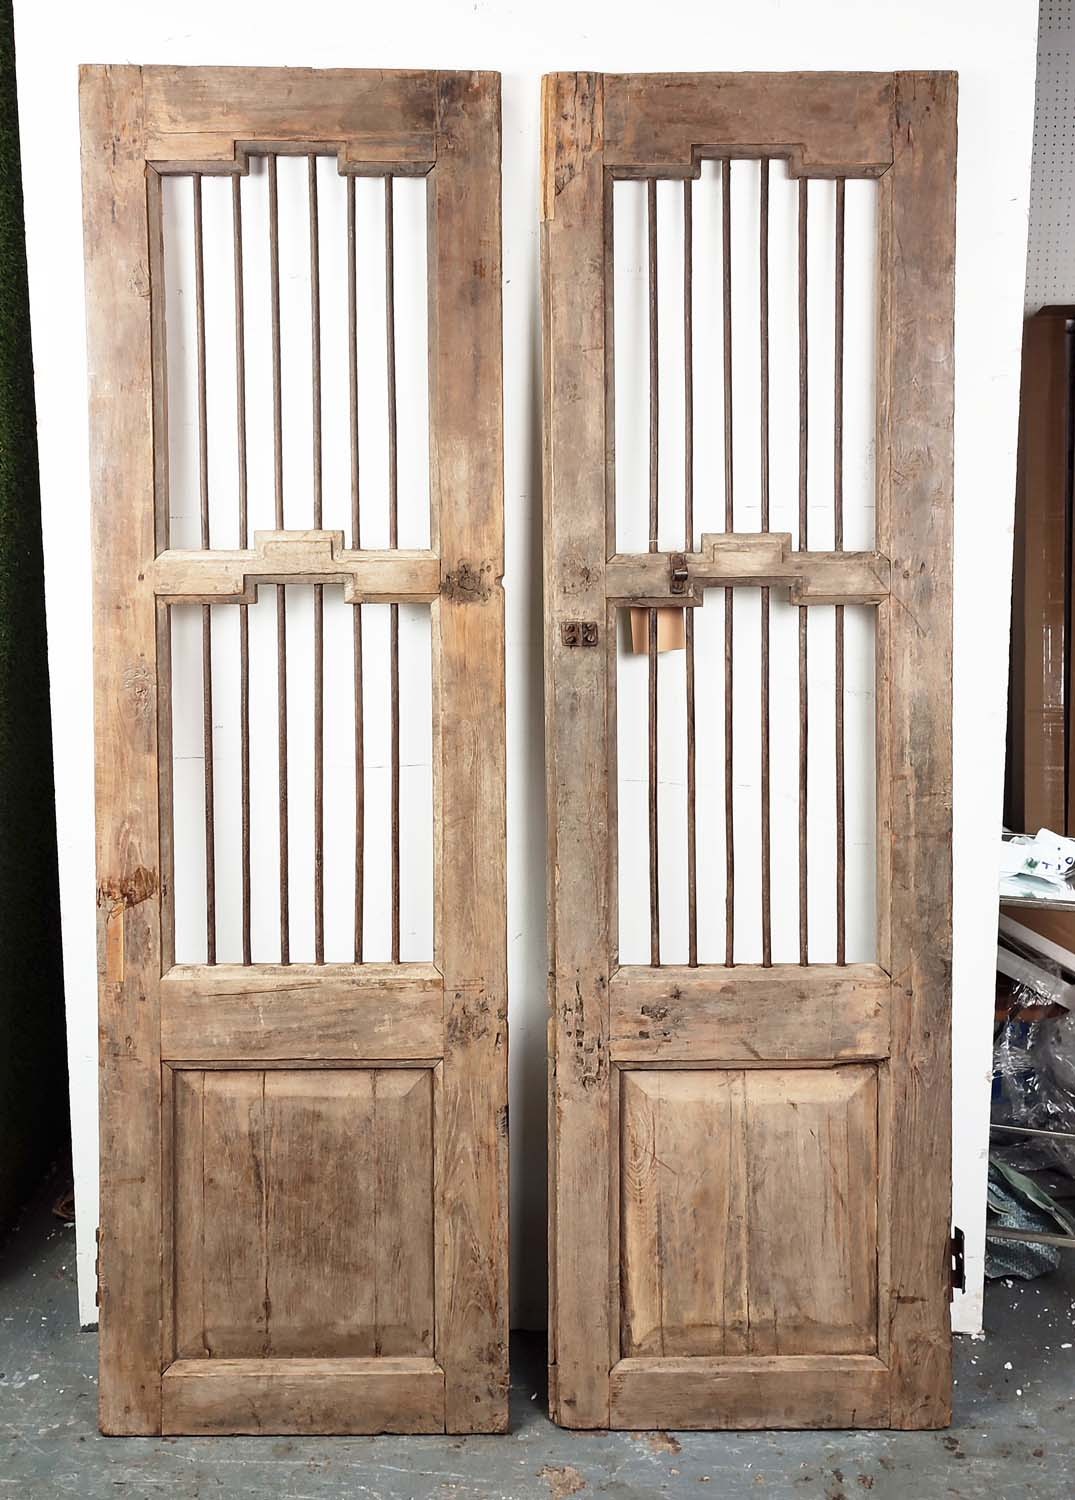 FRENCH WOODEN GATES, a pair, each with iron rod inserts and a single wooden panel, probably 19th